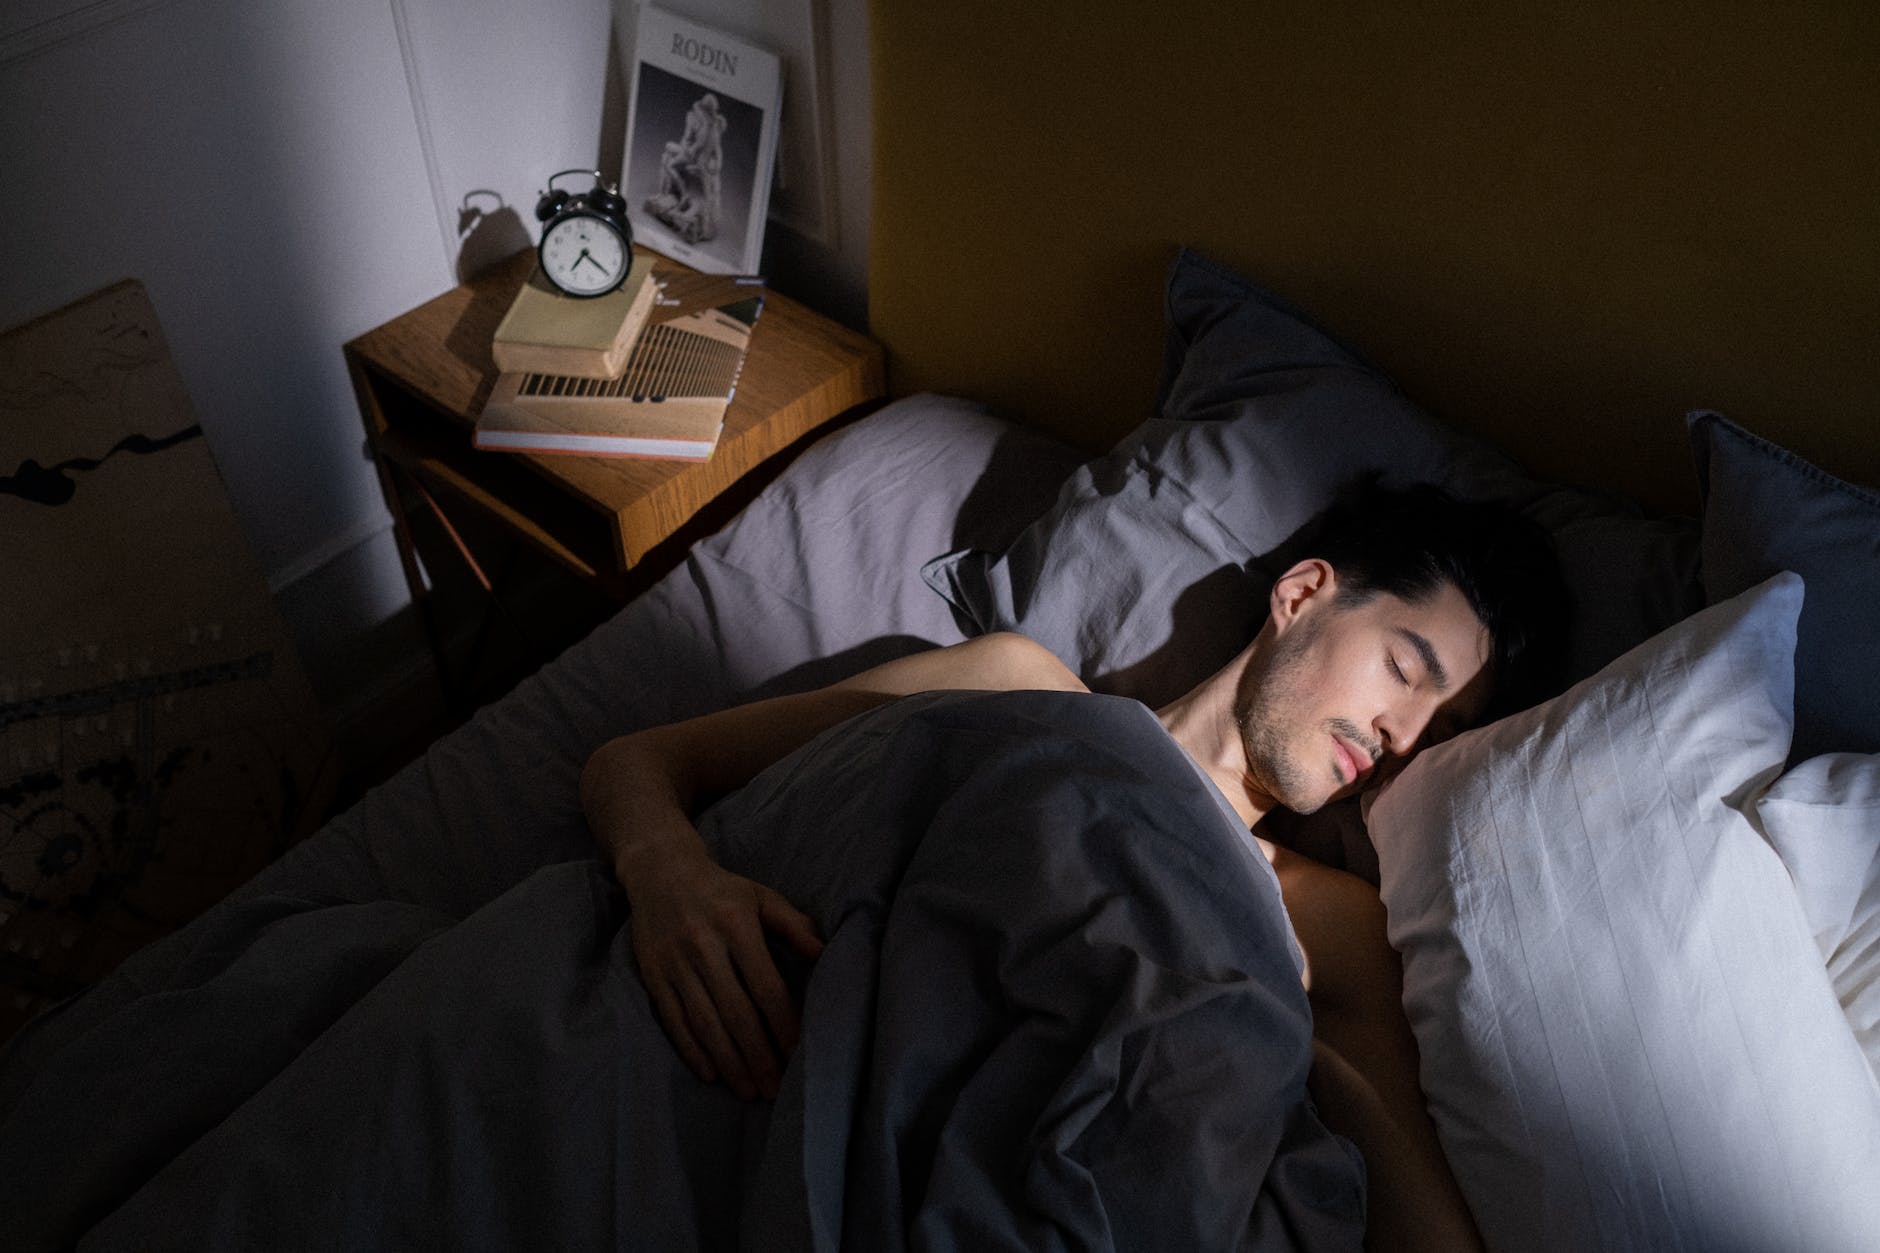 Man in bed still sleeping not harnessing discipline to get to bed to bed earlier to get more rest.